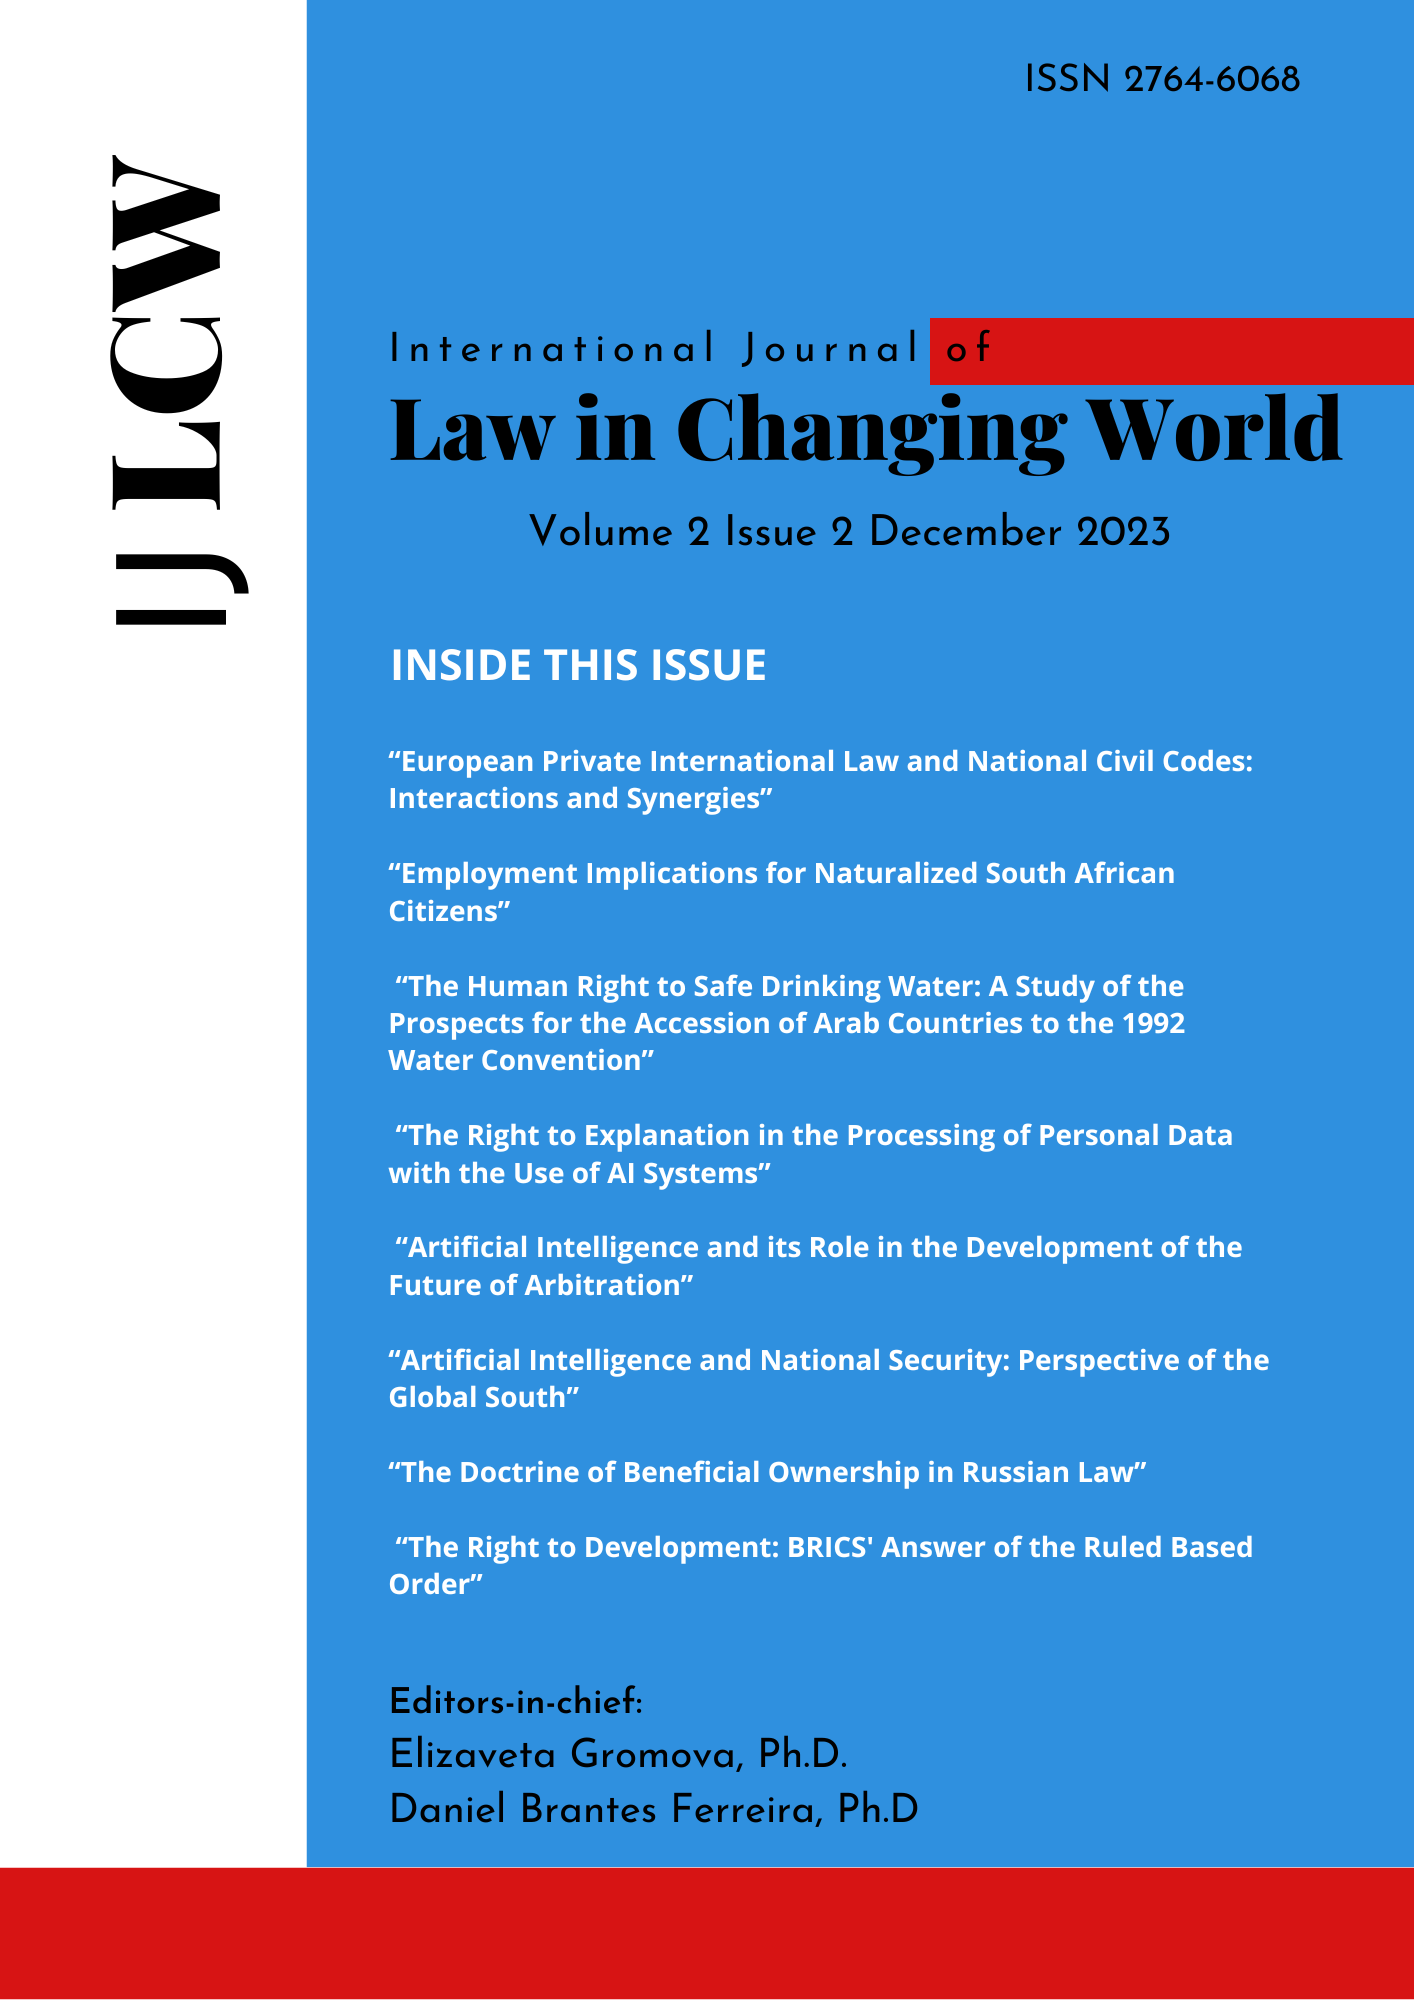 					View Vol. 2 No. 2 (2023): The International Journal of Law in Changing World Issue 2 2023
				